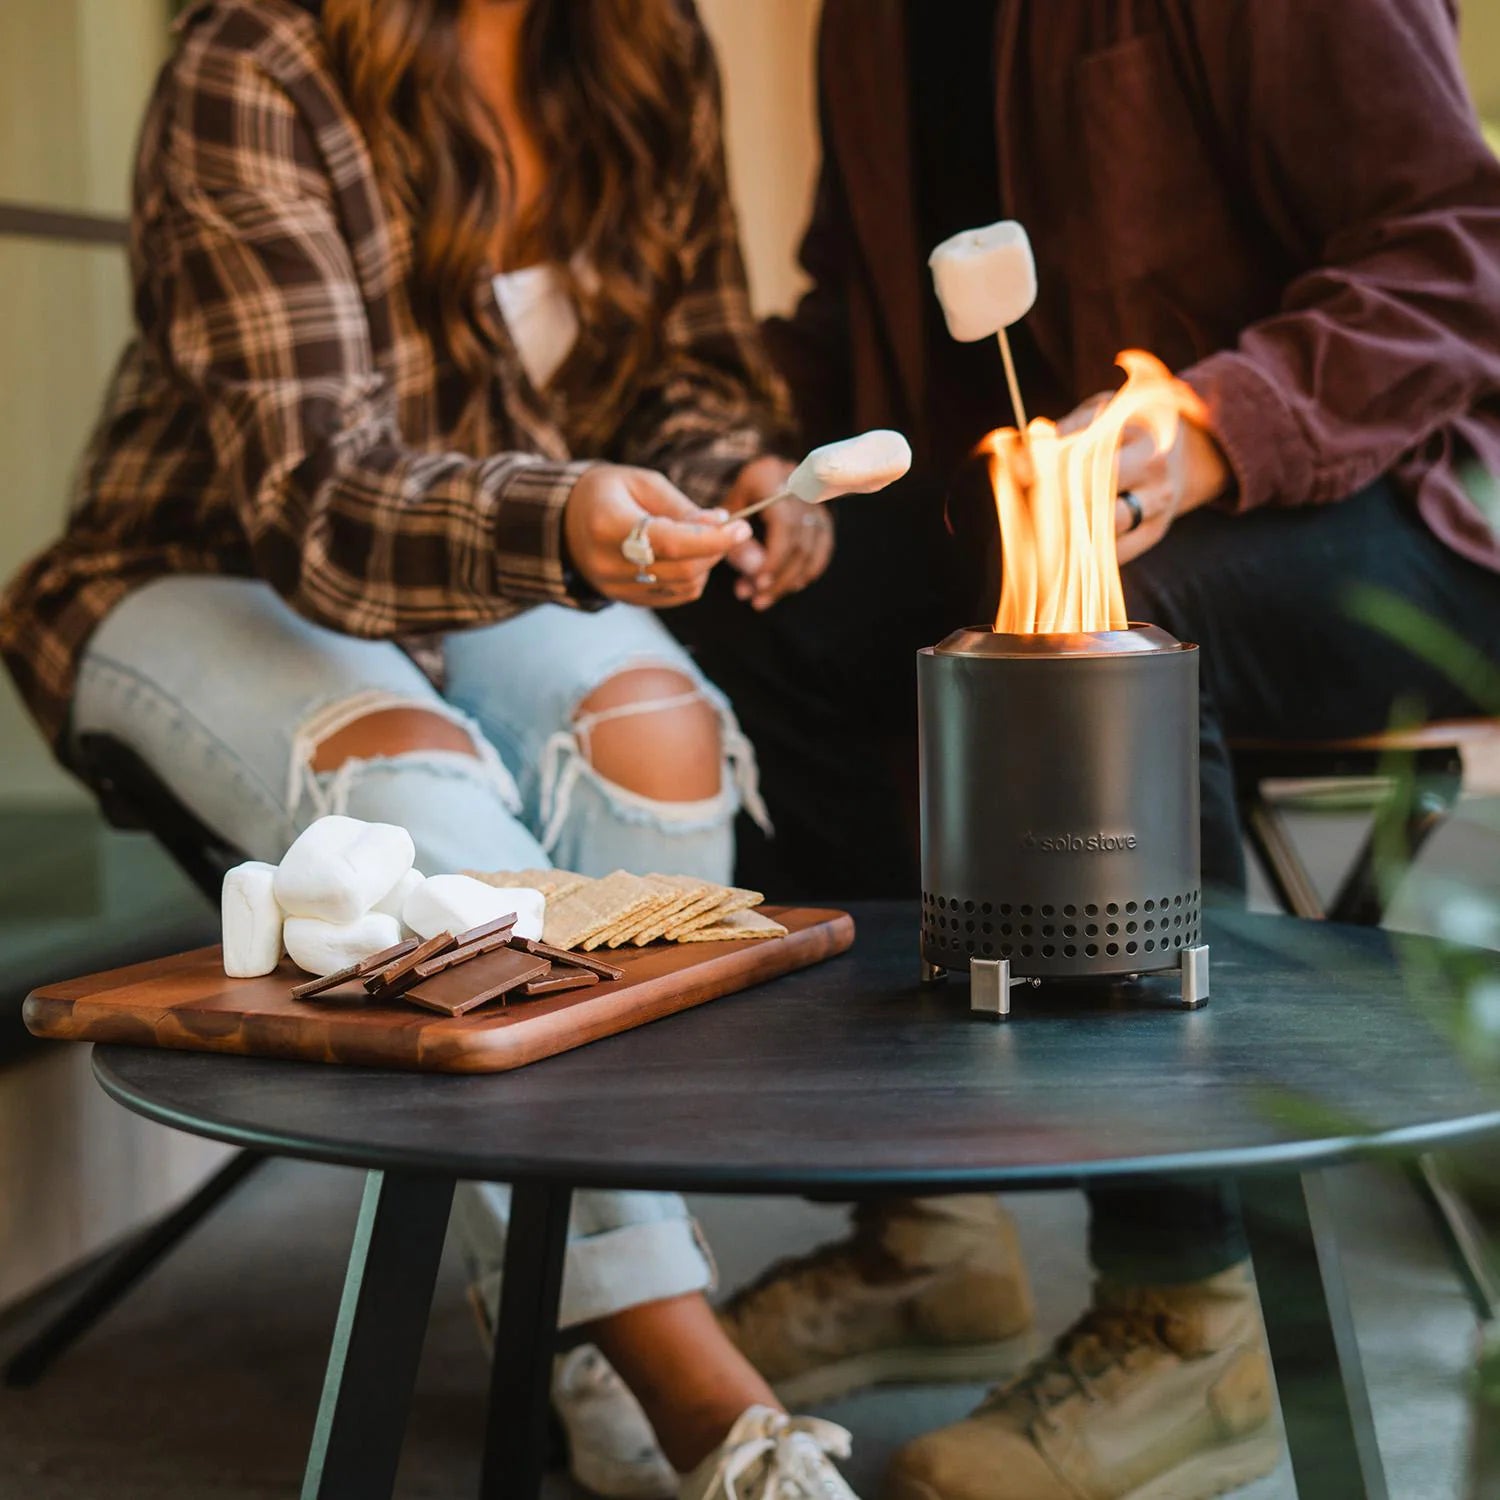 Couple Making Smores on the Solo Stove Tabletop Mesa Fire Pit - Lifestyle Image